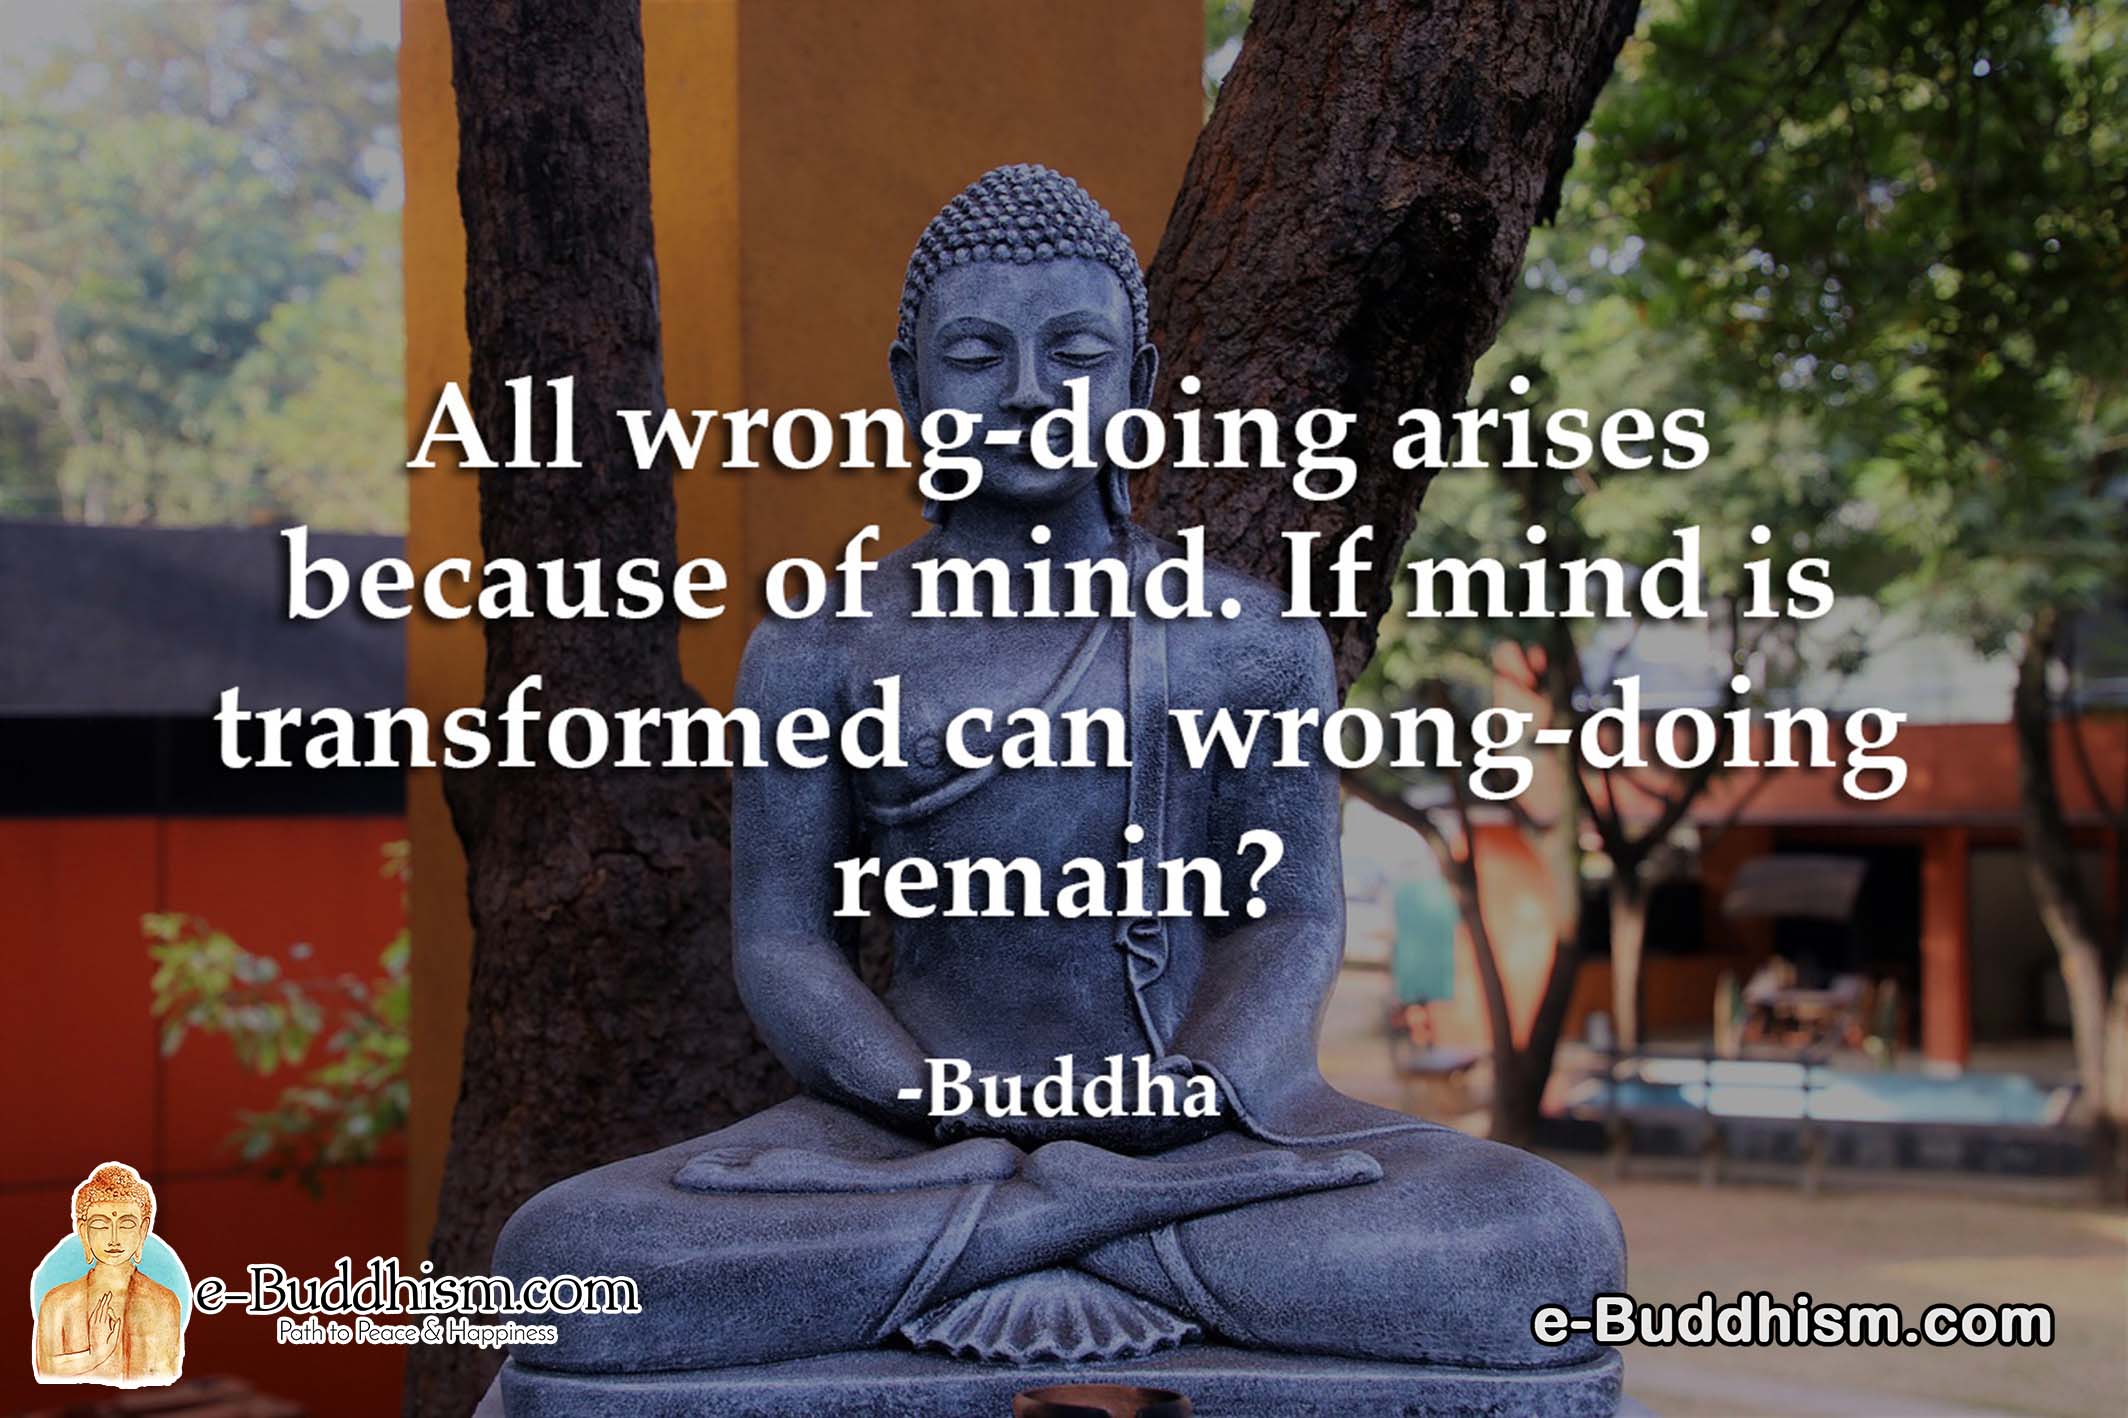 All wrong-doing arises because of the mind. If the mind is transformed can wrong-doing remain? -Buddha